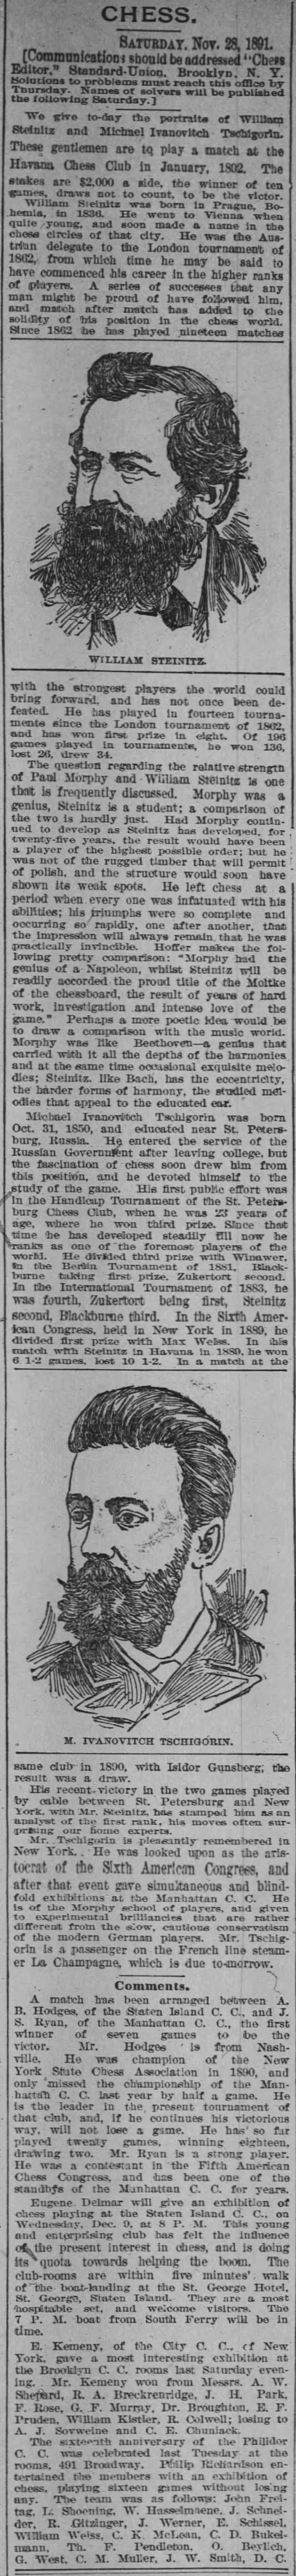 1891.11.28-01 Brooklyn Daily Standard-Union.png